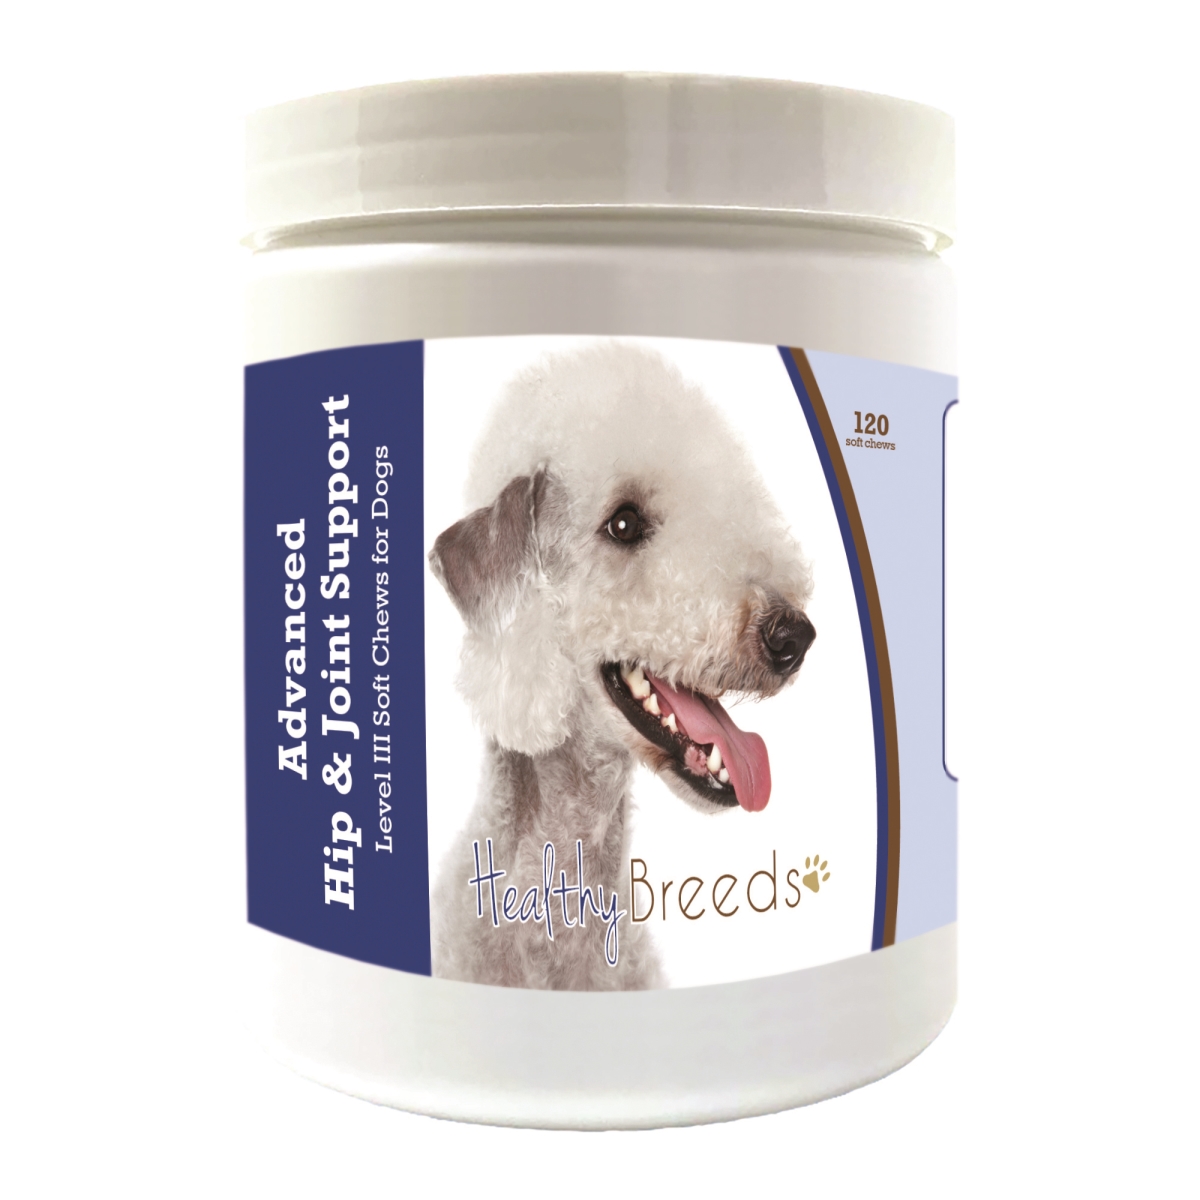 Picture of Healthy Breeds 192959897586 Bedlington Terrier Advanced Hip & Joint Support Level III Soft Chews for Dogs